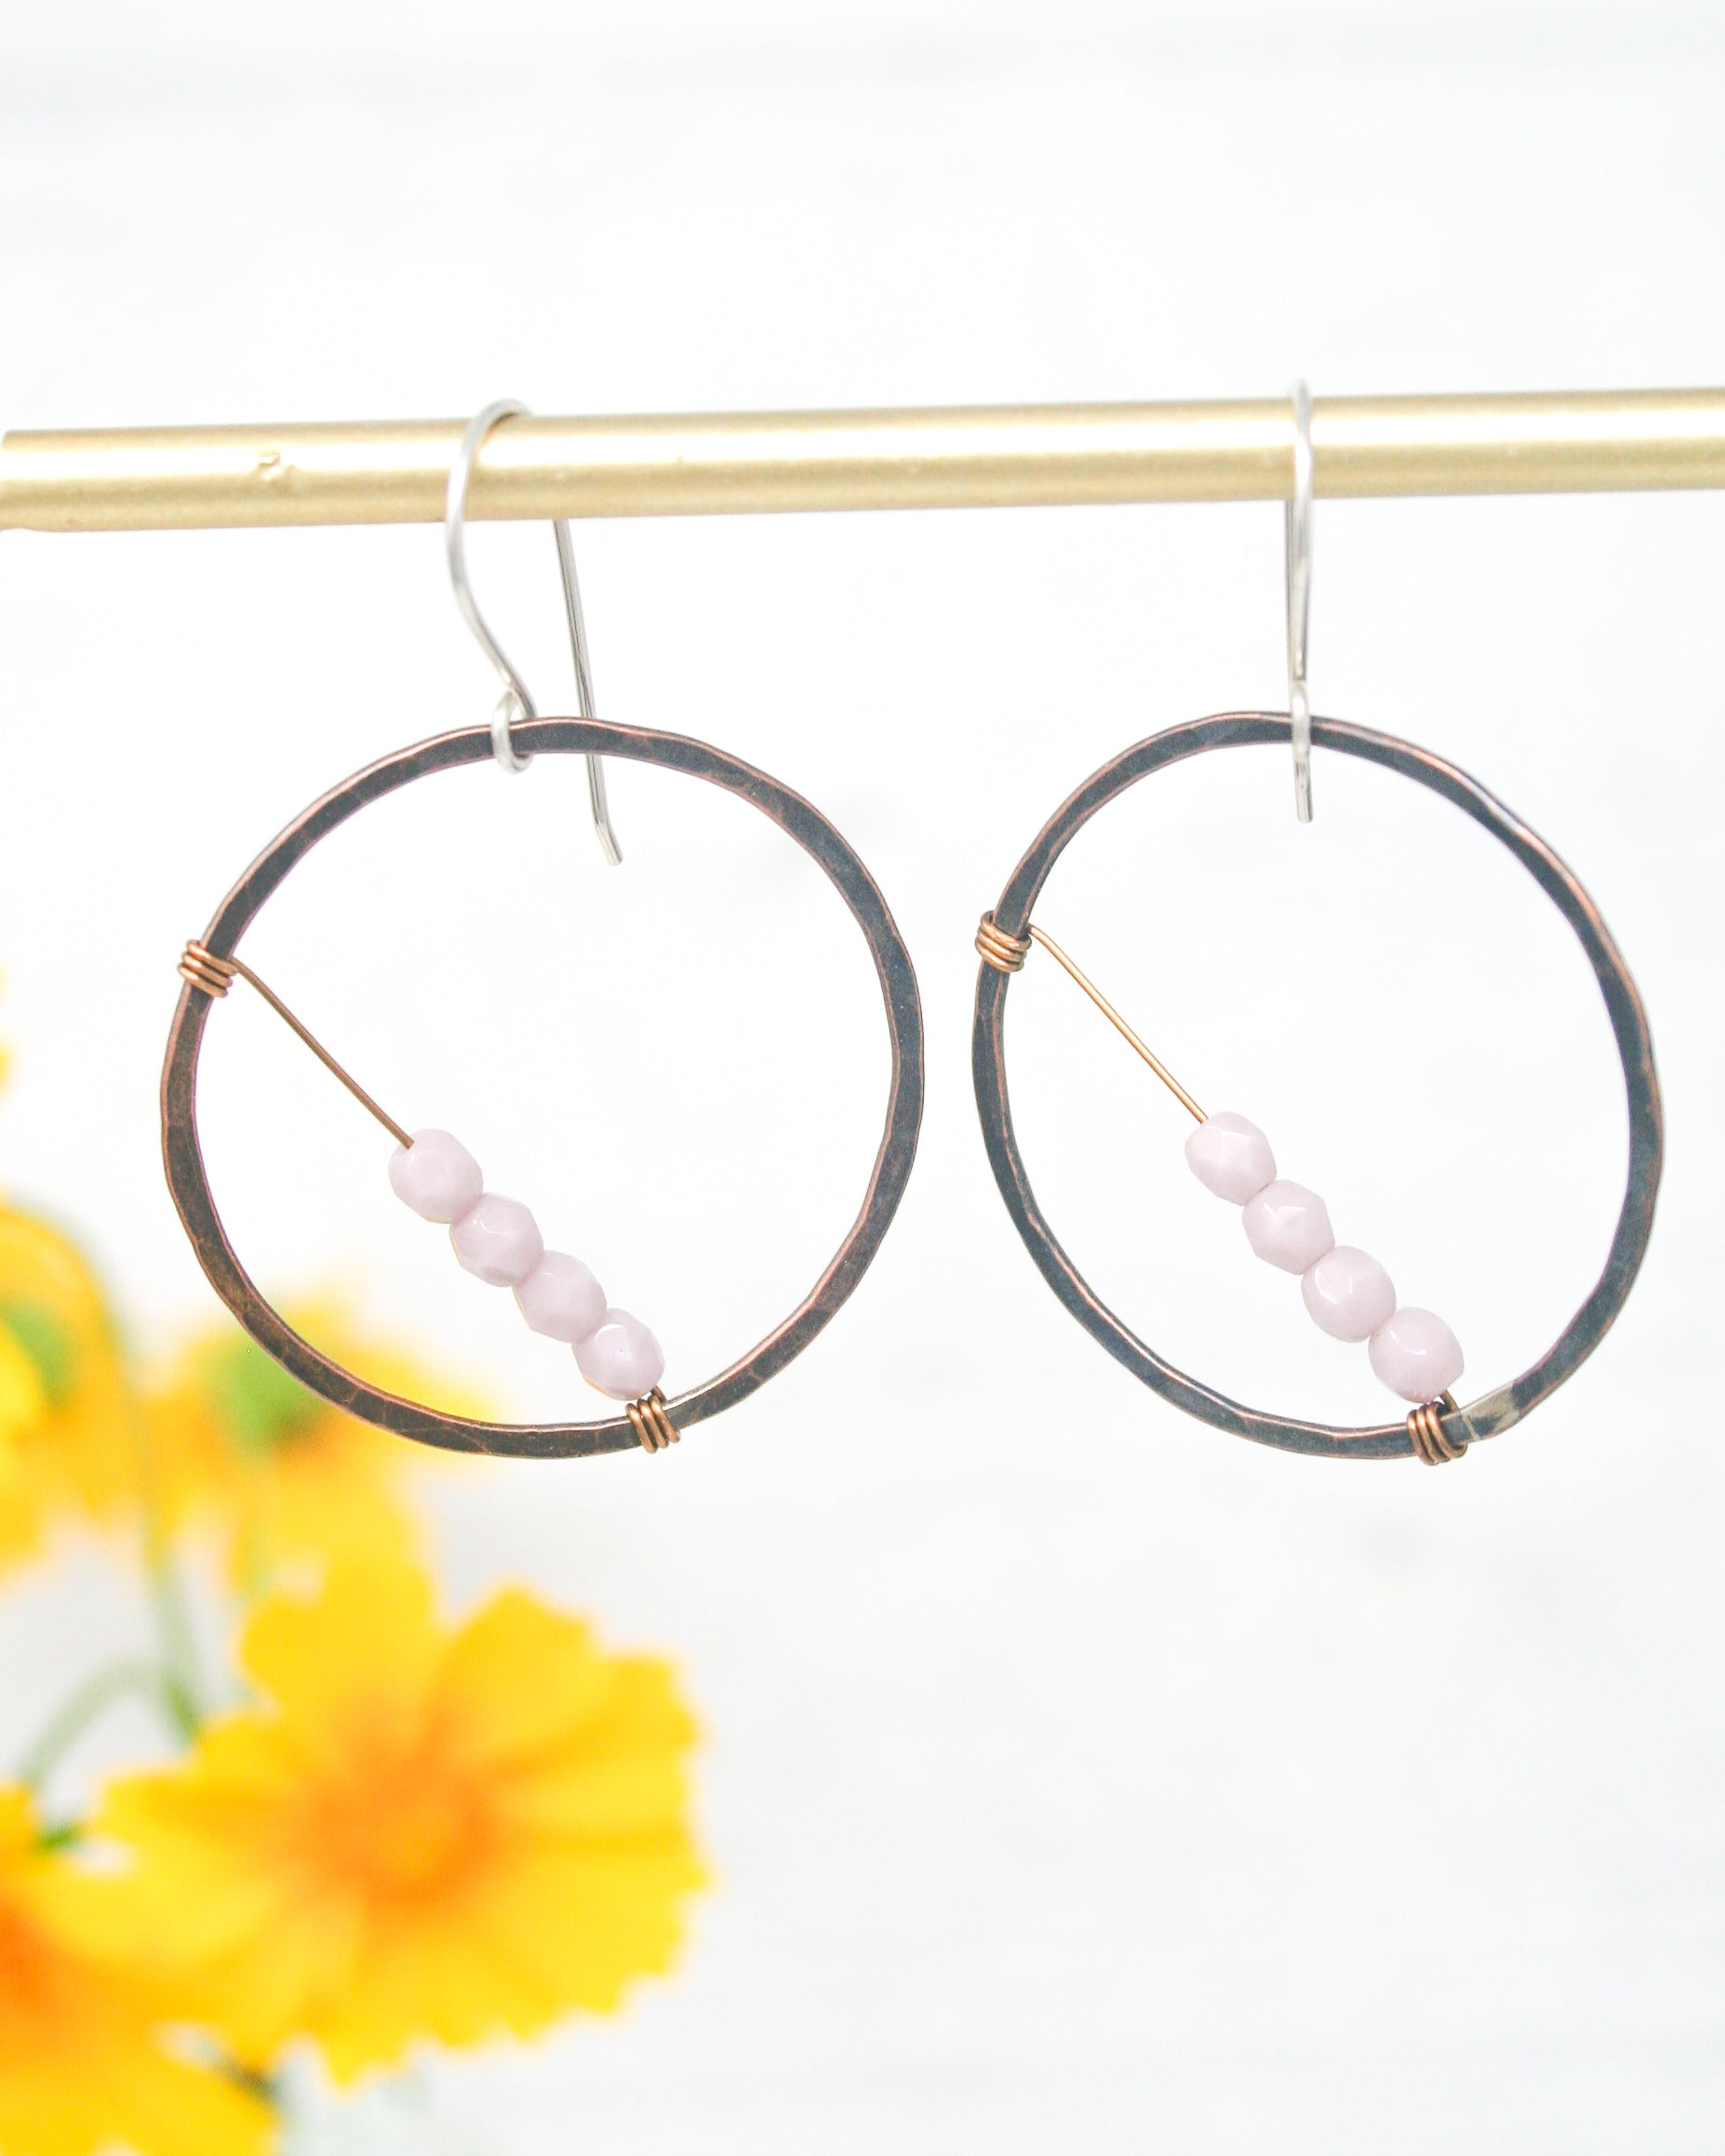 a pair of hoop earrings with beads hanging from them